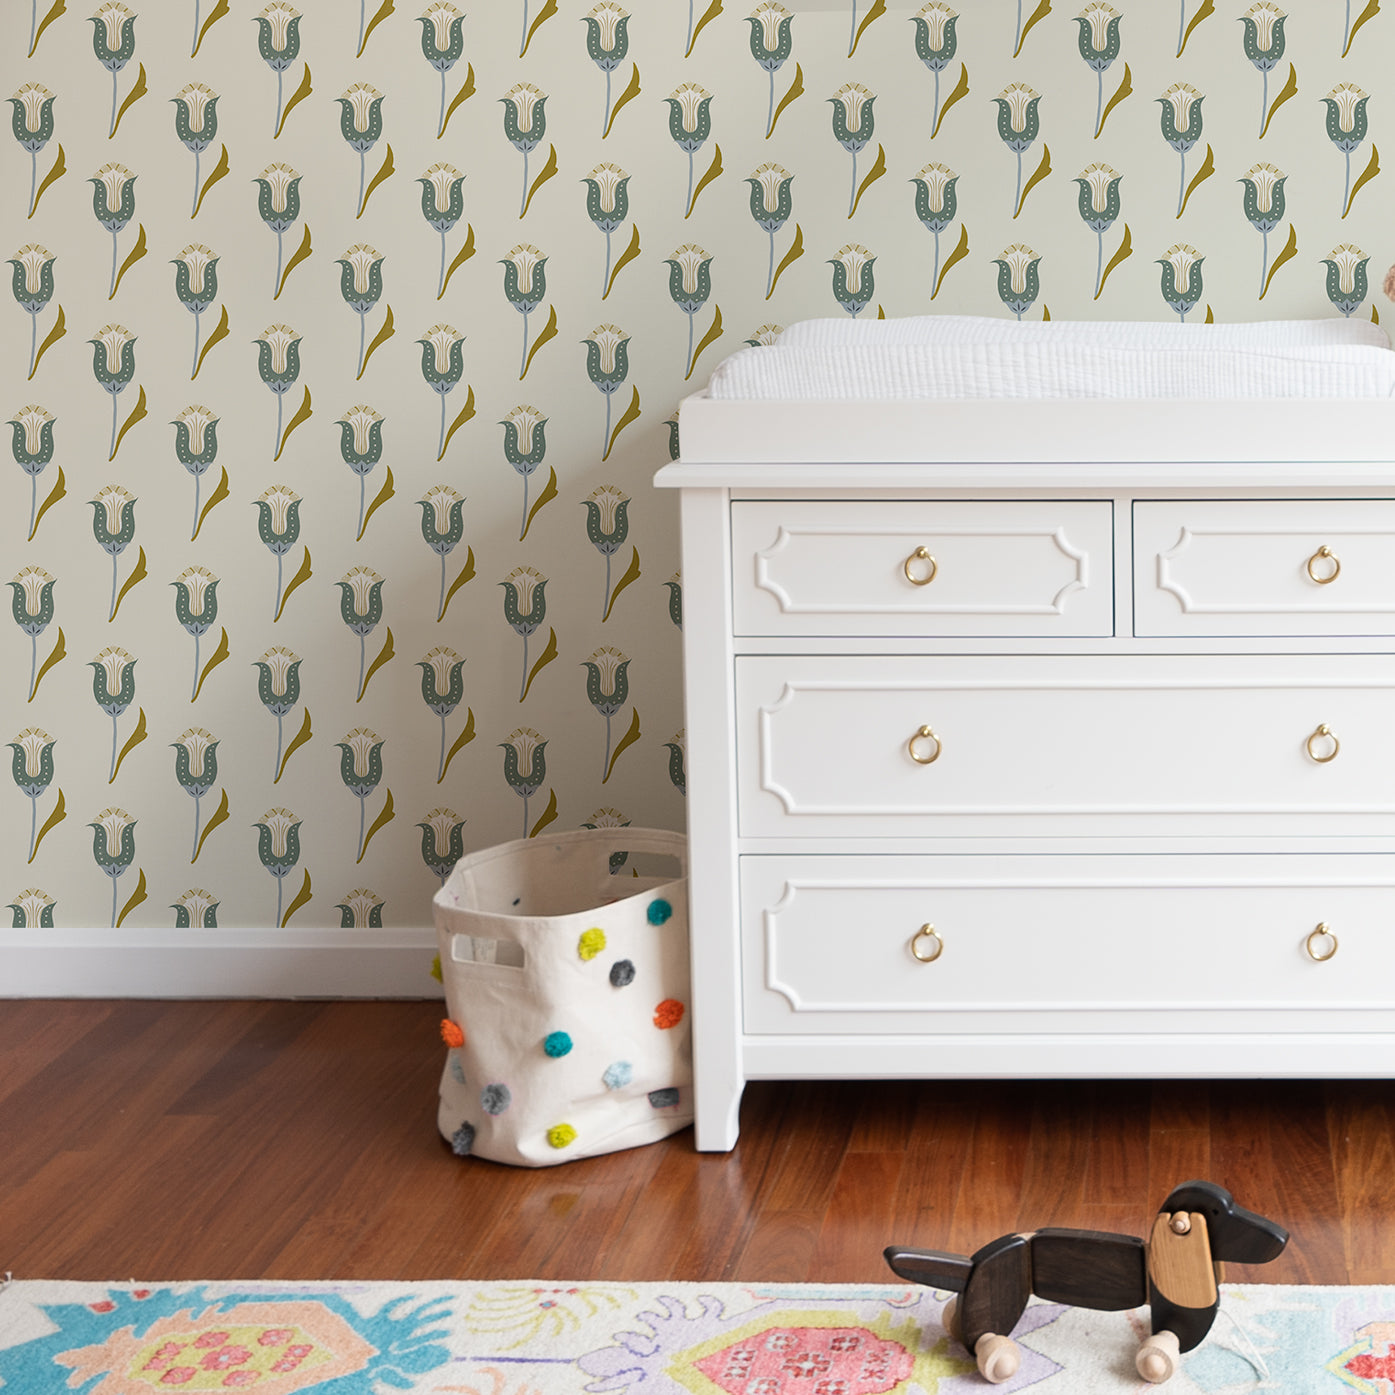 Abstract floral blue and green wallpaper on a wall with a white changing table with drawers in front with a colorful rug